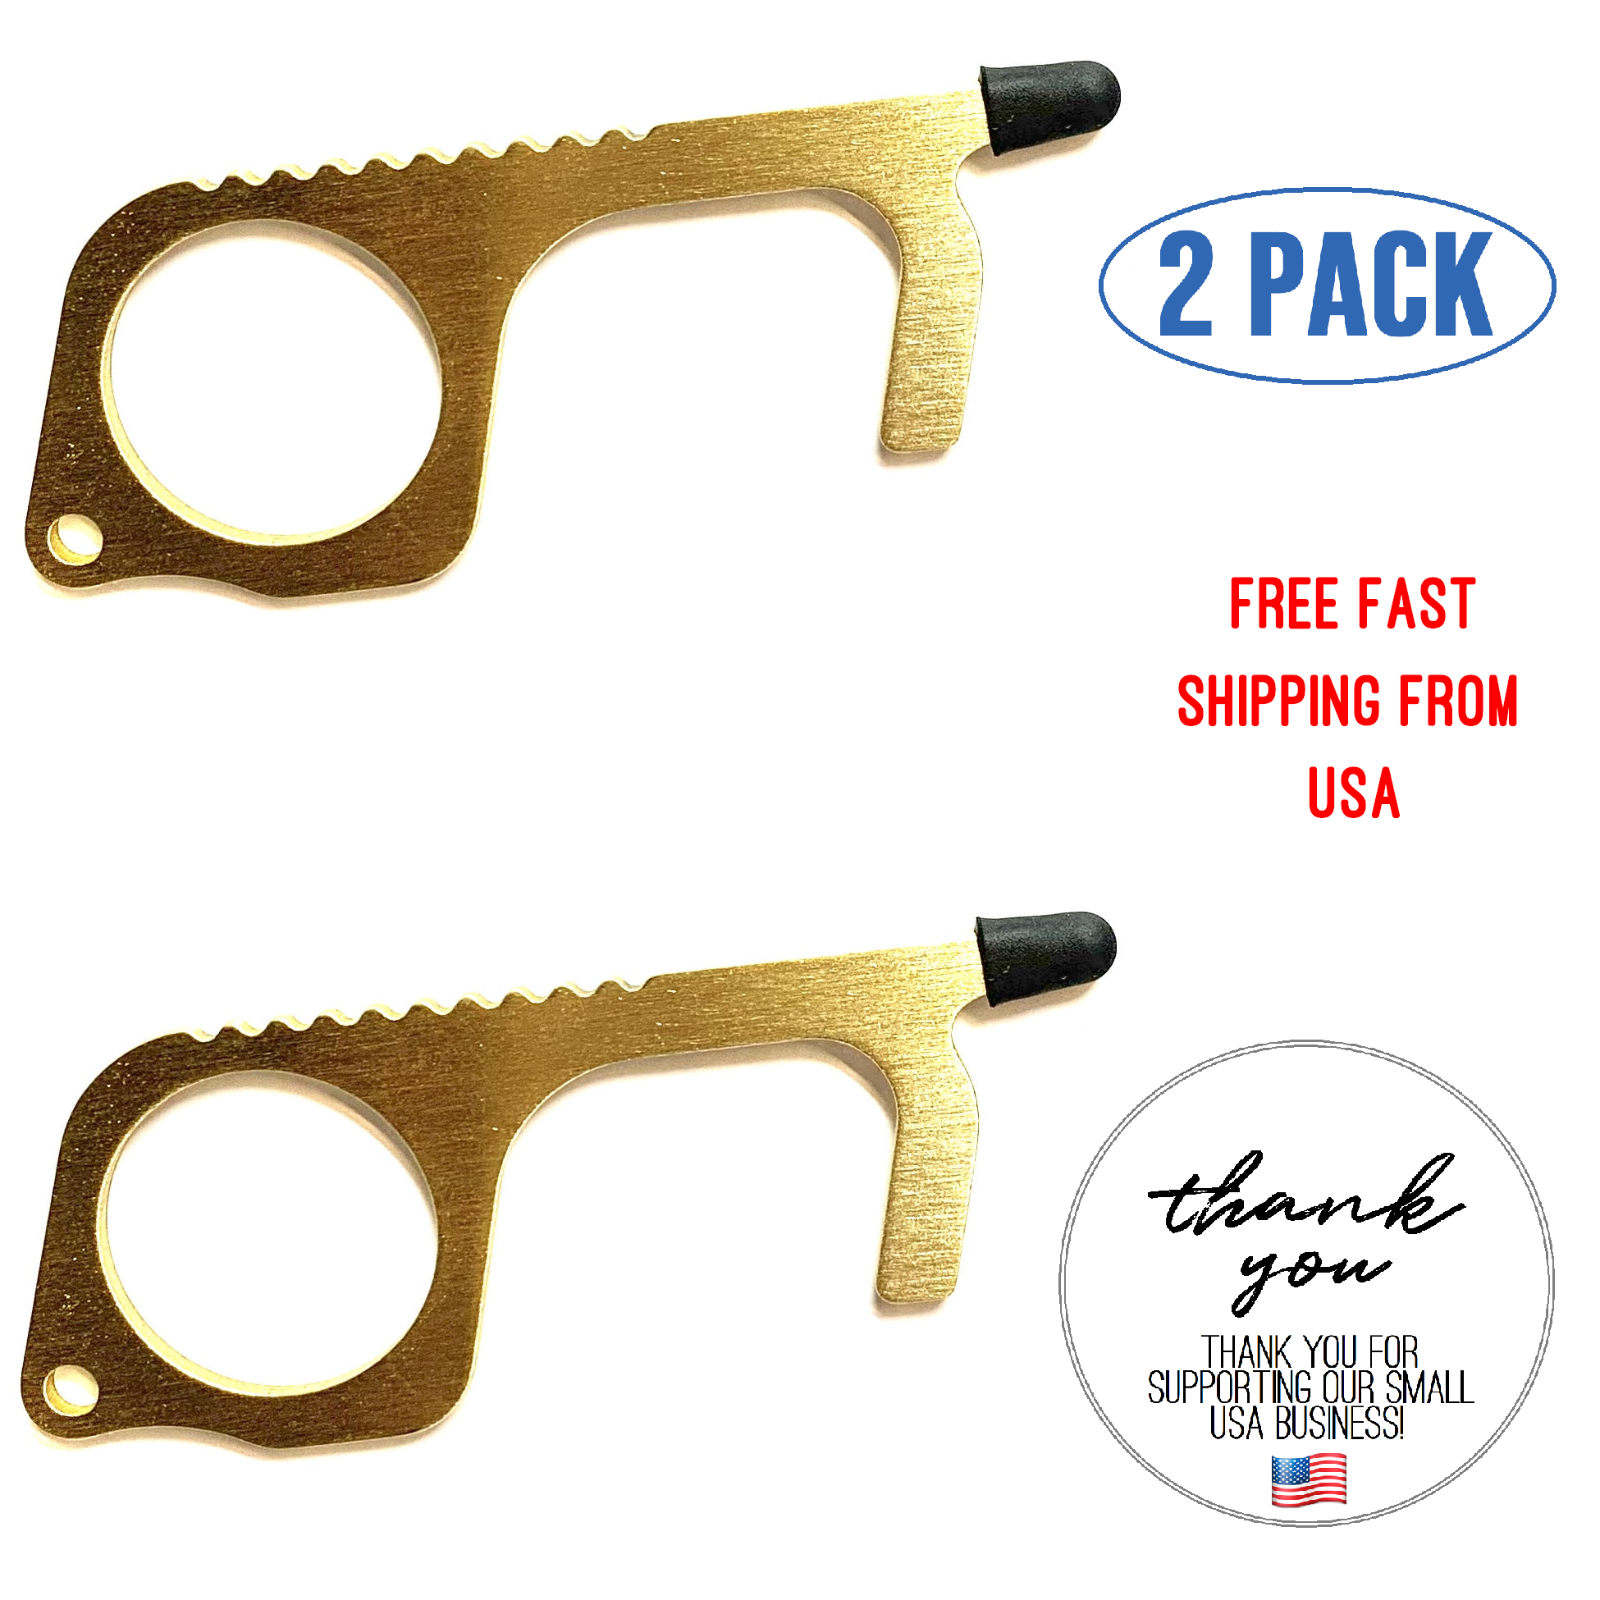 2 Pack | Brass Edc Door Opener | No Touch Keychain Tool | Free Ship From Usa